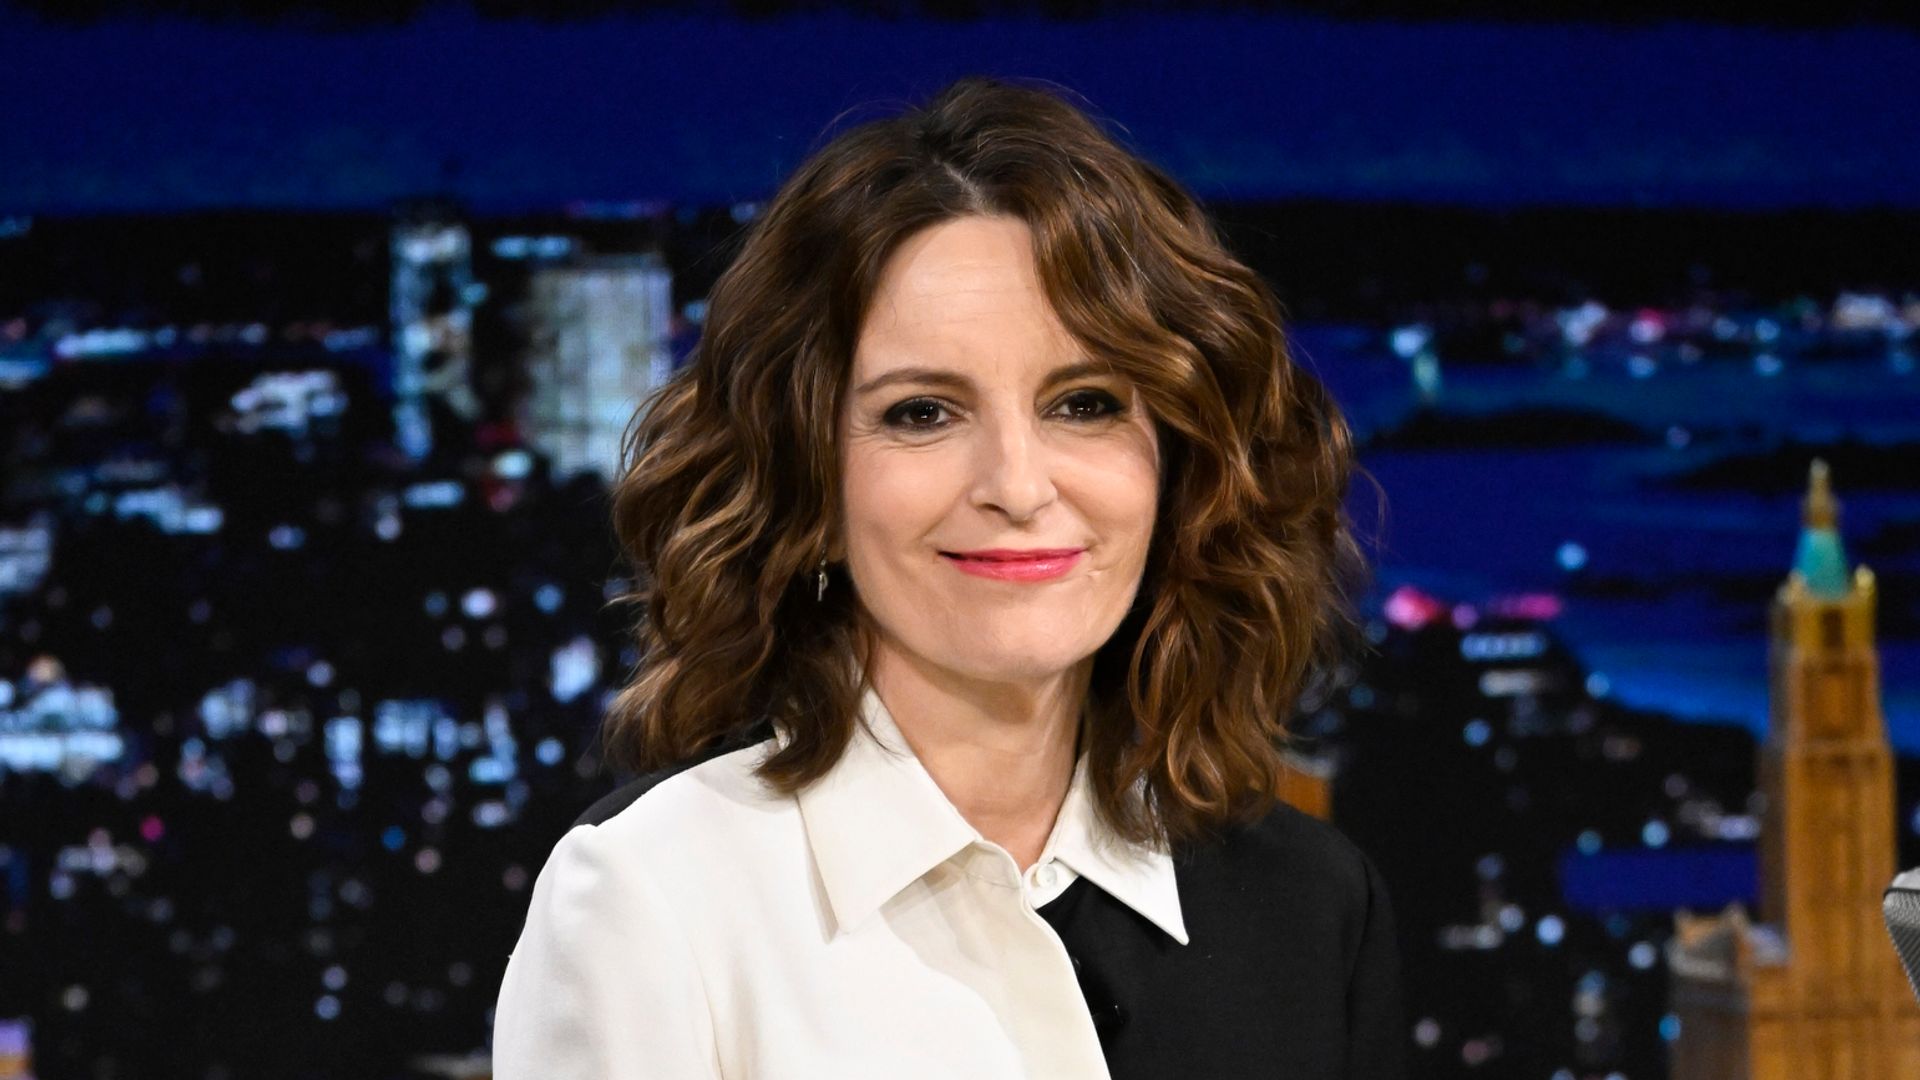 THE TONIGHT SHOW STARRING JIMMY FALLON -- Episode 1900 -- Pictured: Actress & comedian Tina Fey during an interview on Wednesday, January 10, 2024